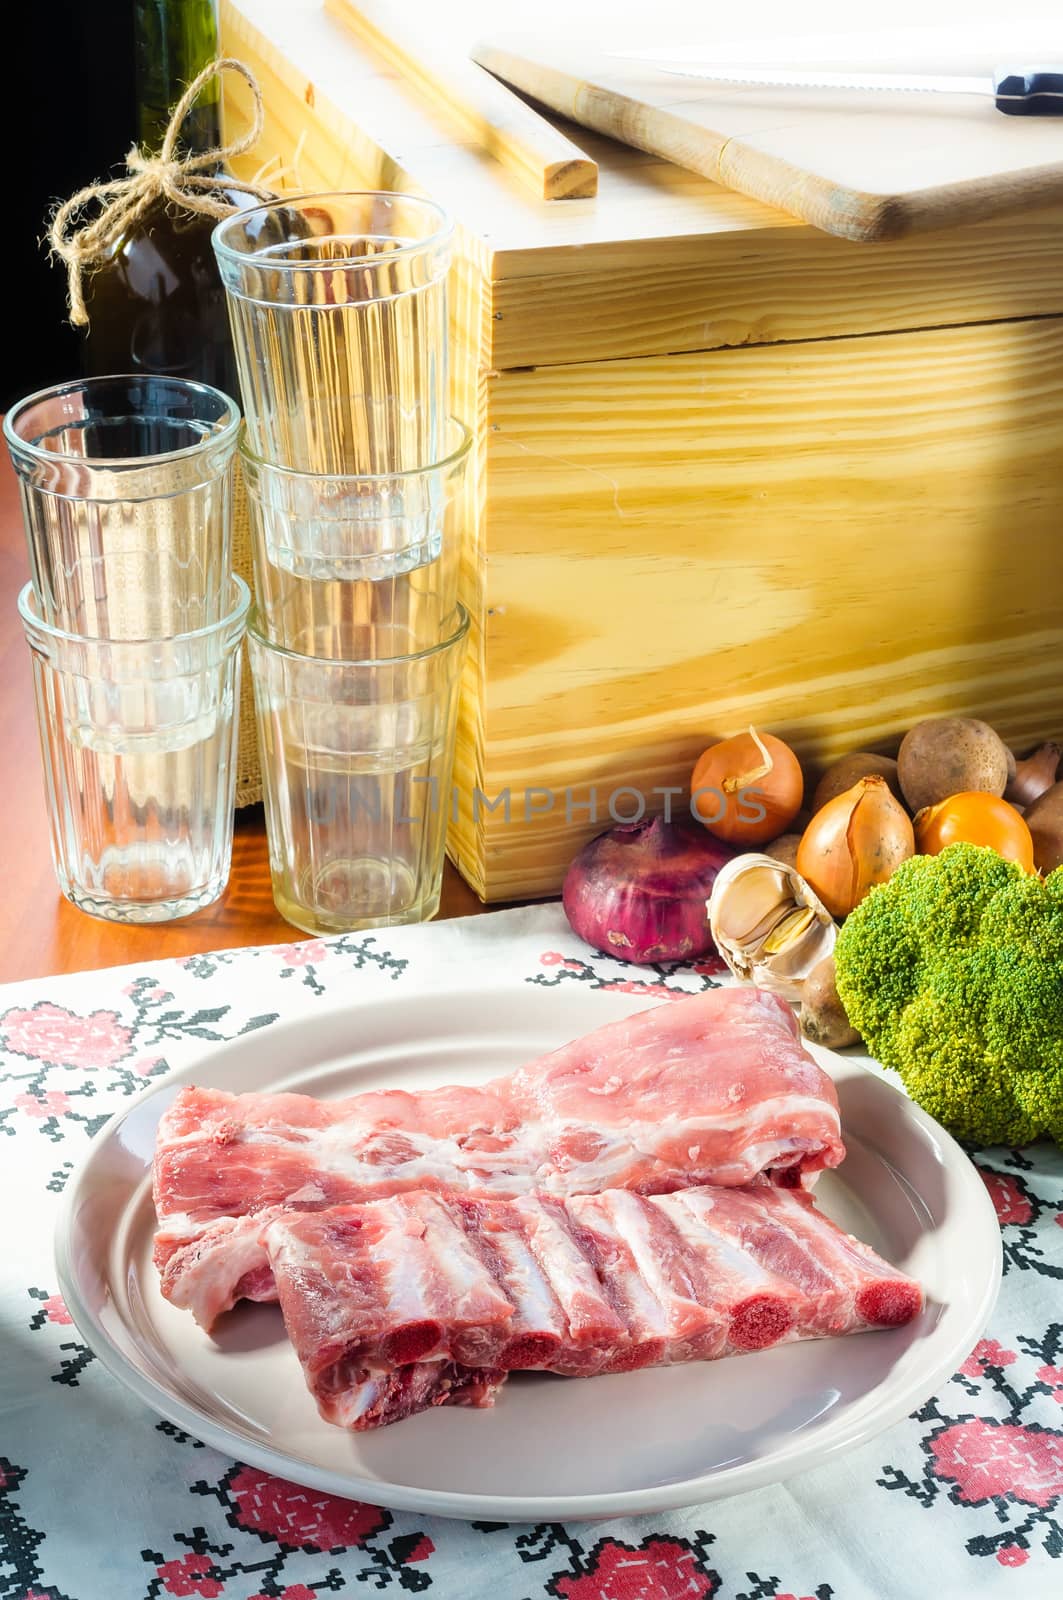 Pork ribs on a plate, rustic ambience around, with vegetable, glasses and bottle